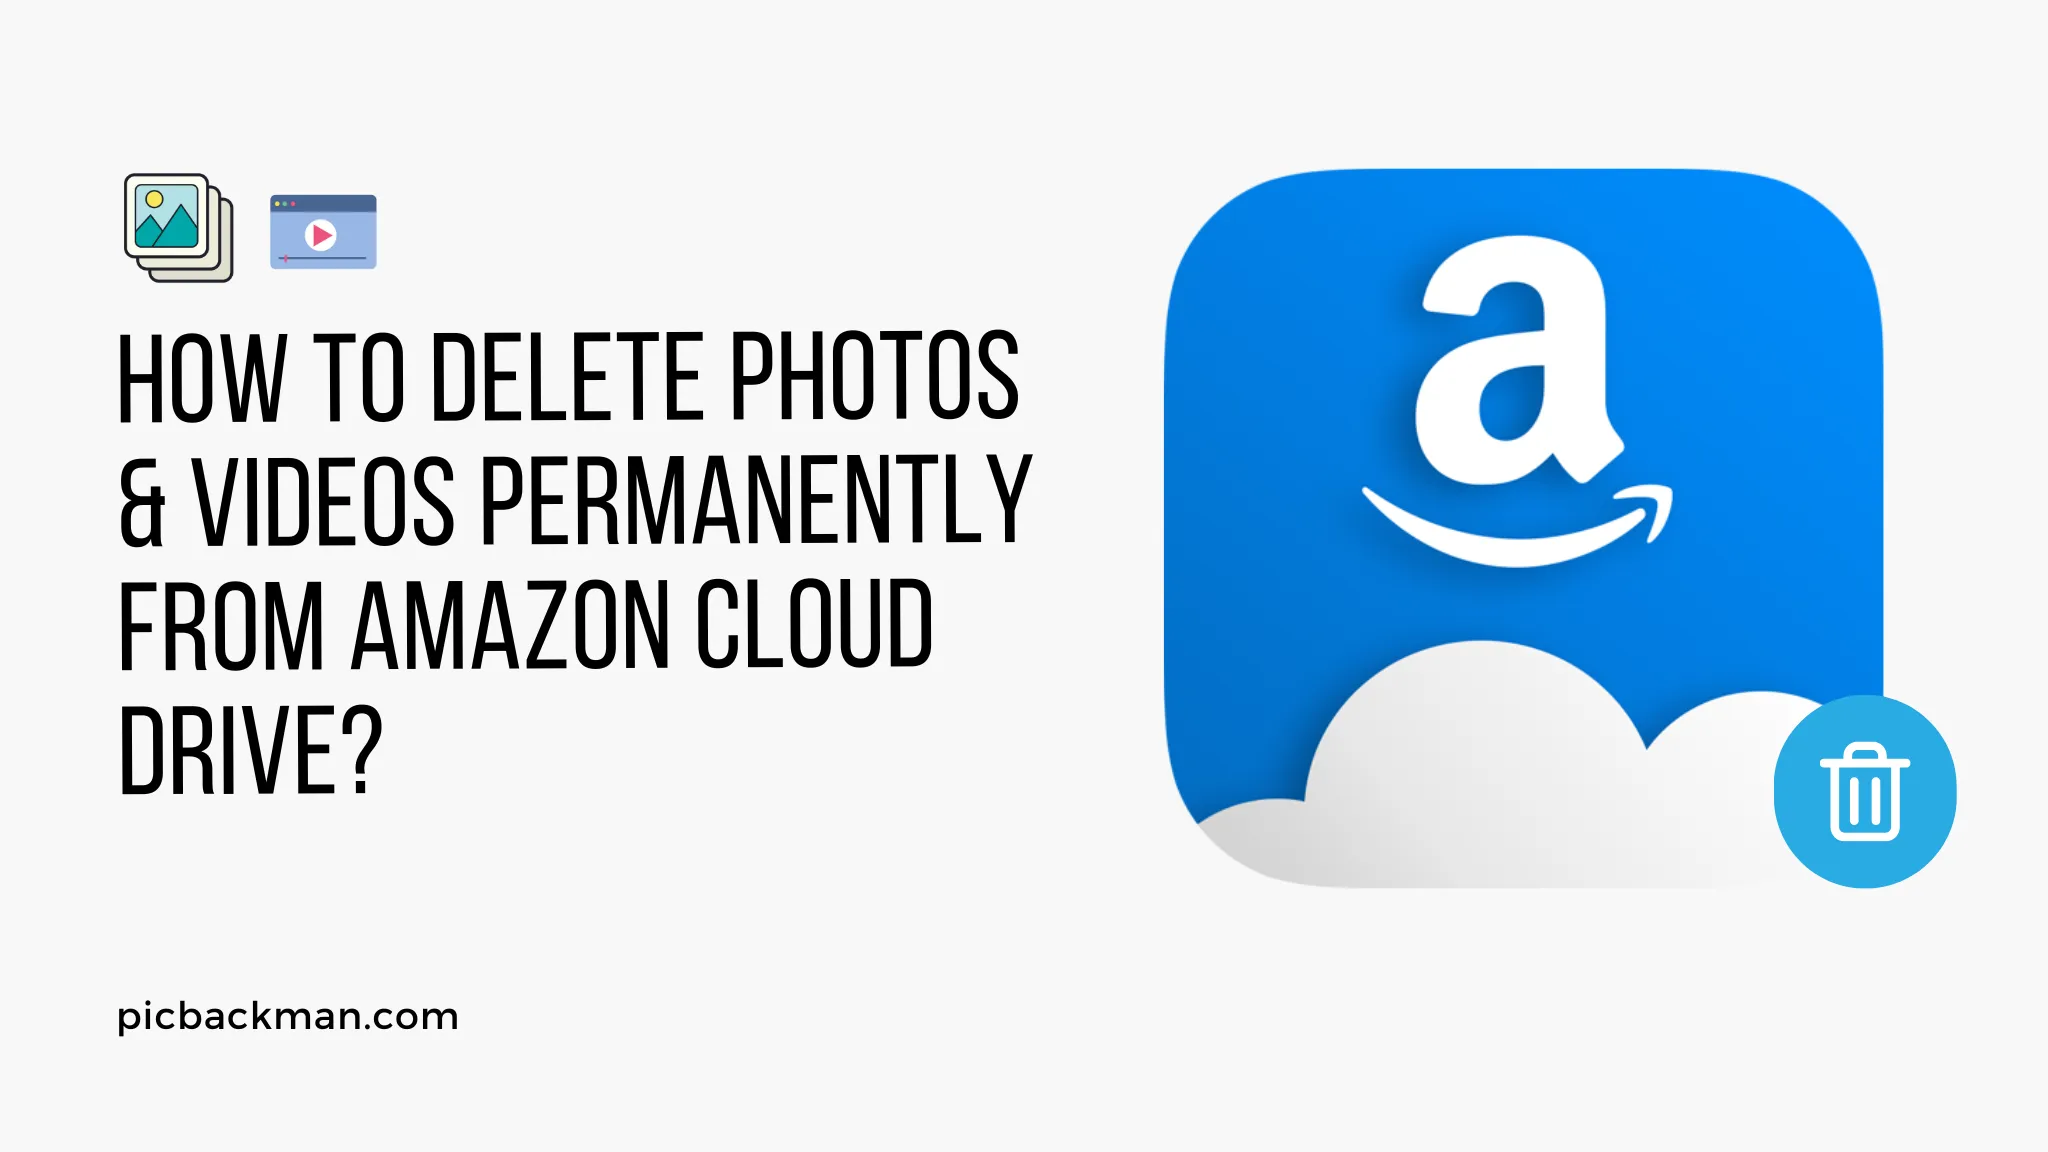 How to Delete Photos and Videos Permanently from Amazon Cloud Drive